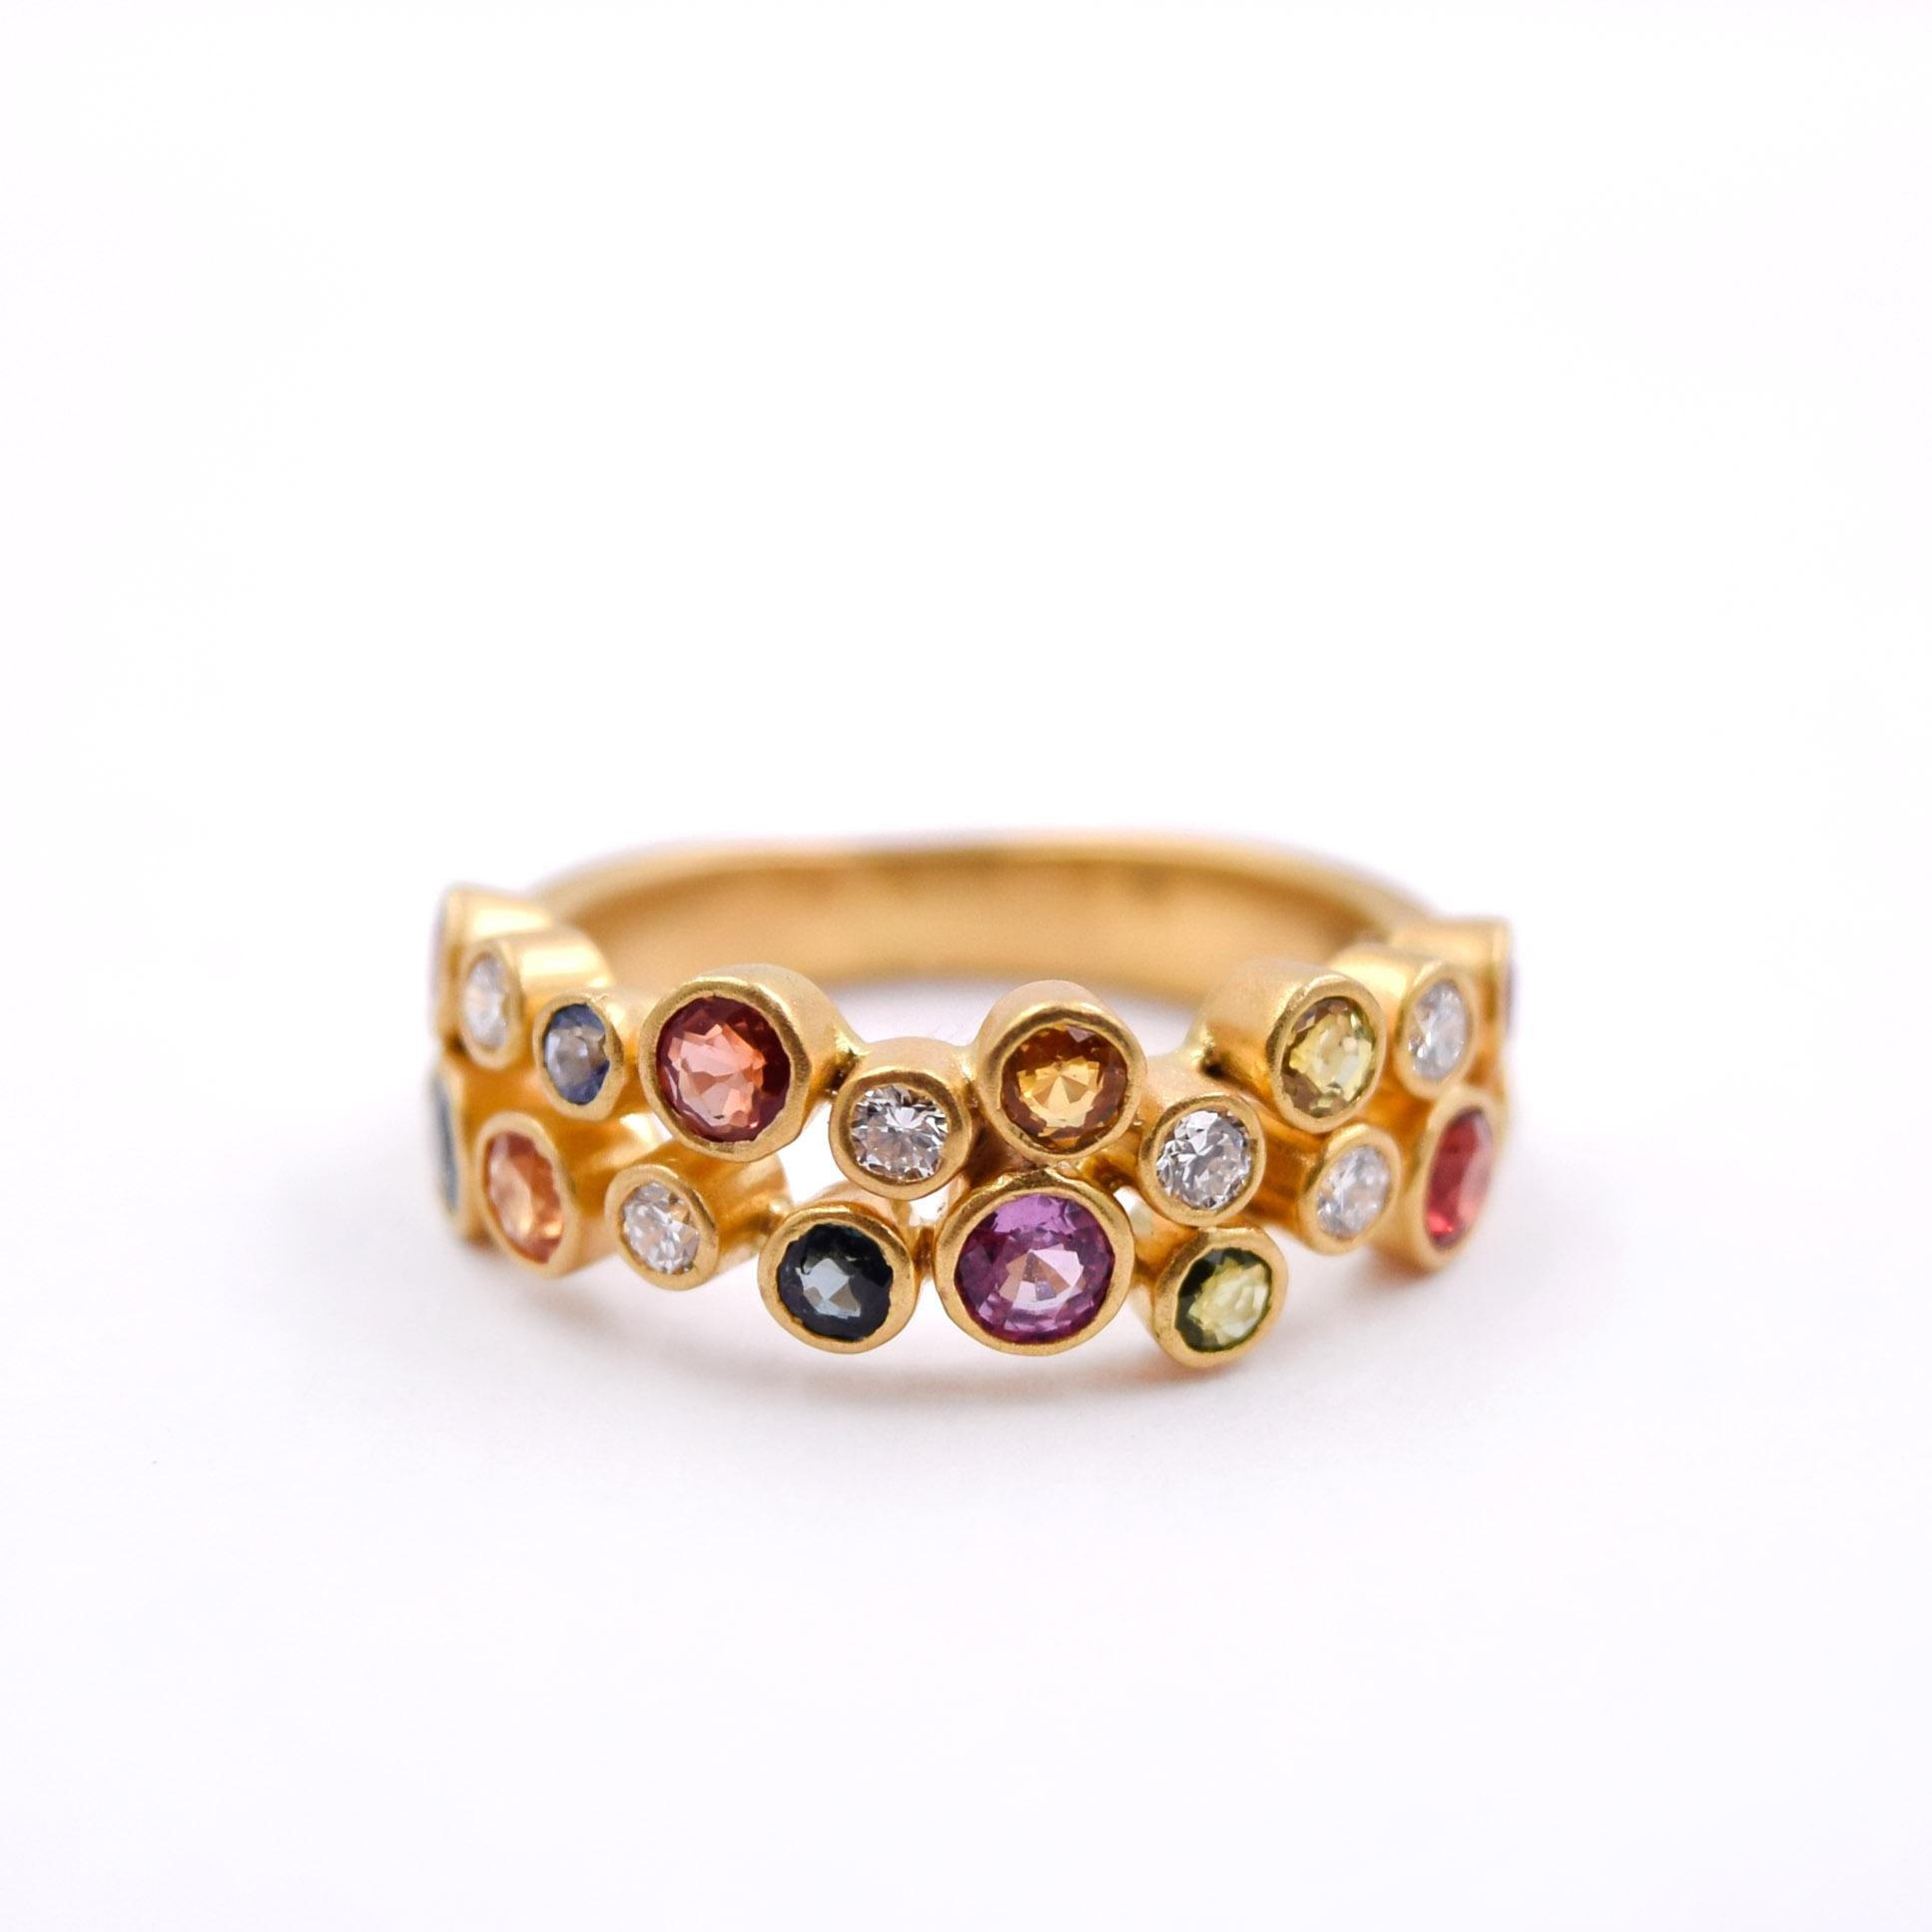 Beautiful Sapphire and Diamond Band by Kanwar Singh. 
This ring features sparkles of all colors. Carefully set white diamonds and colored sapphires are set halfway around the 18k yellow gold ring. The stones are set in bezel settings, totaling 0.71